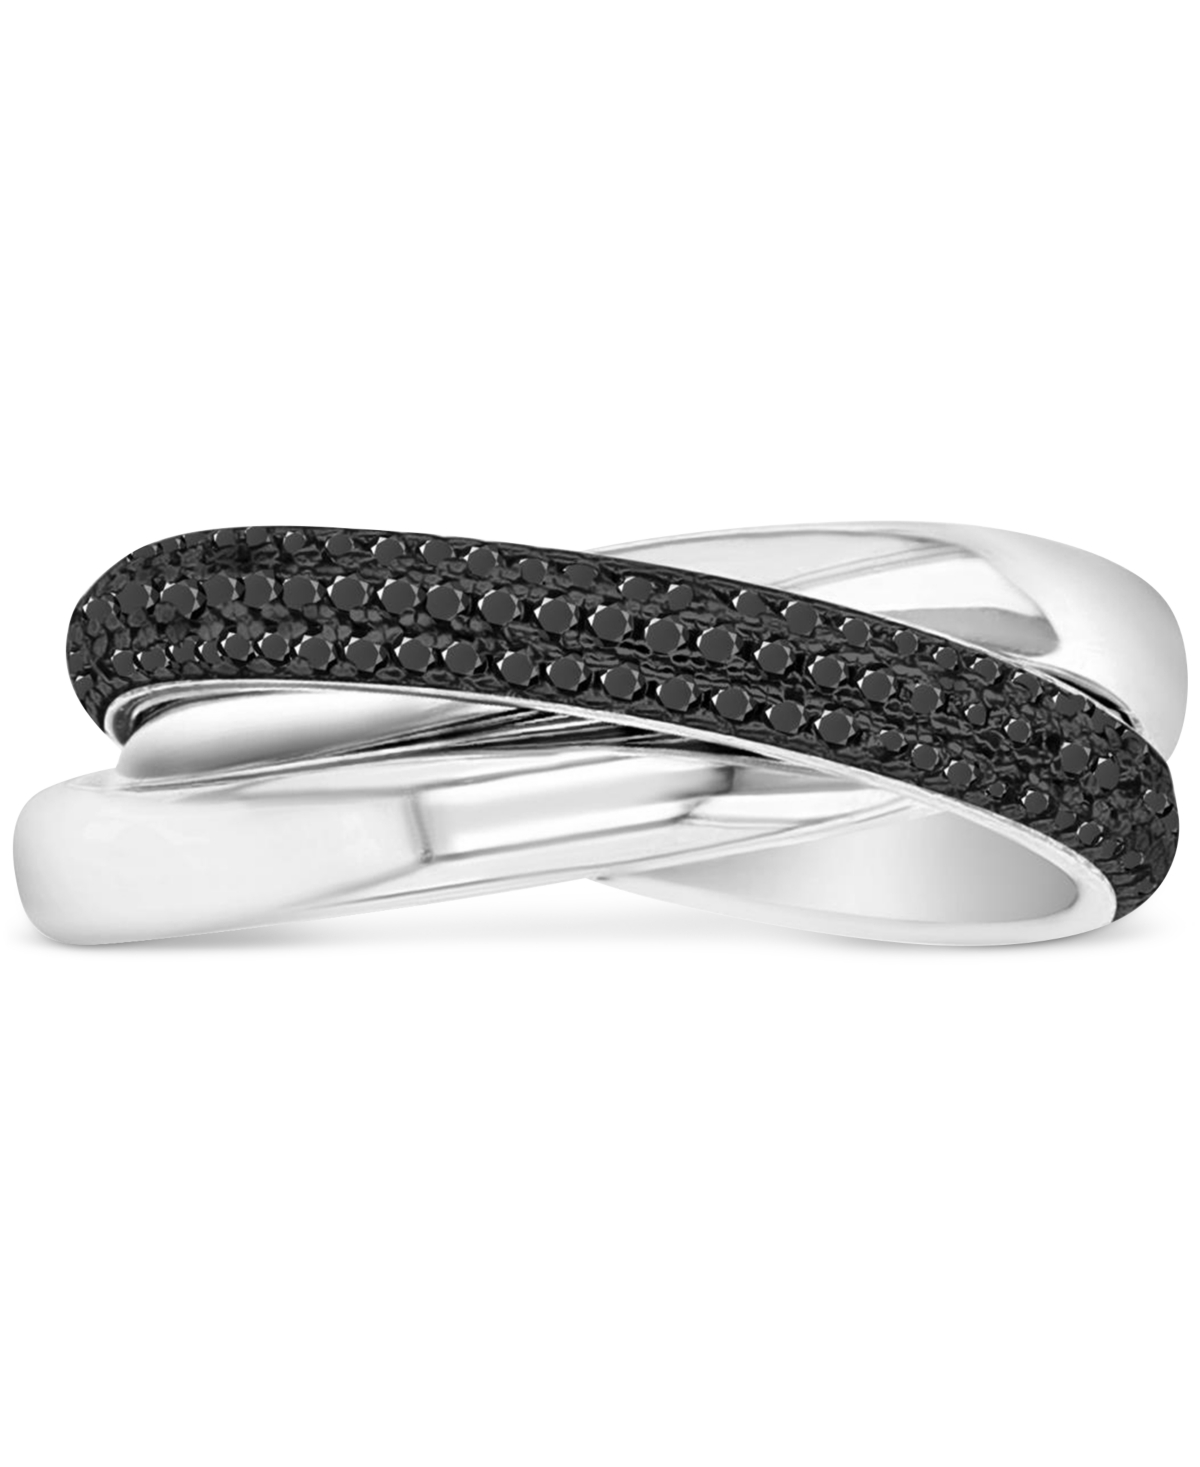 Black Spinel & Polished Band Crossover Statement Ring (1-1/4 ct. t.w.) in Sterling Silver - Black Spinel